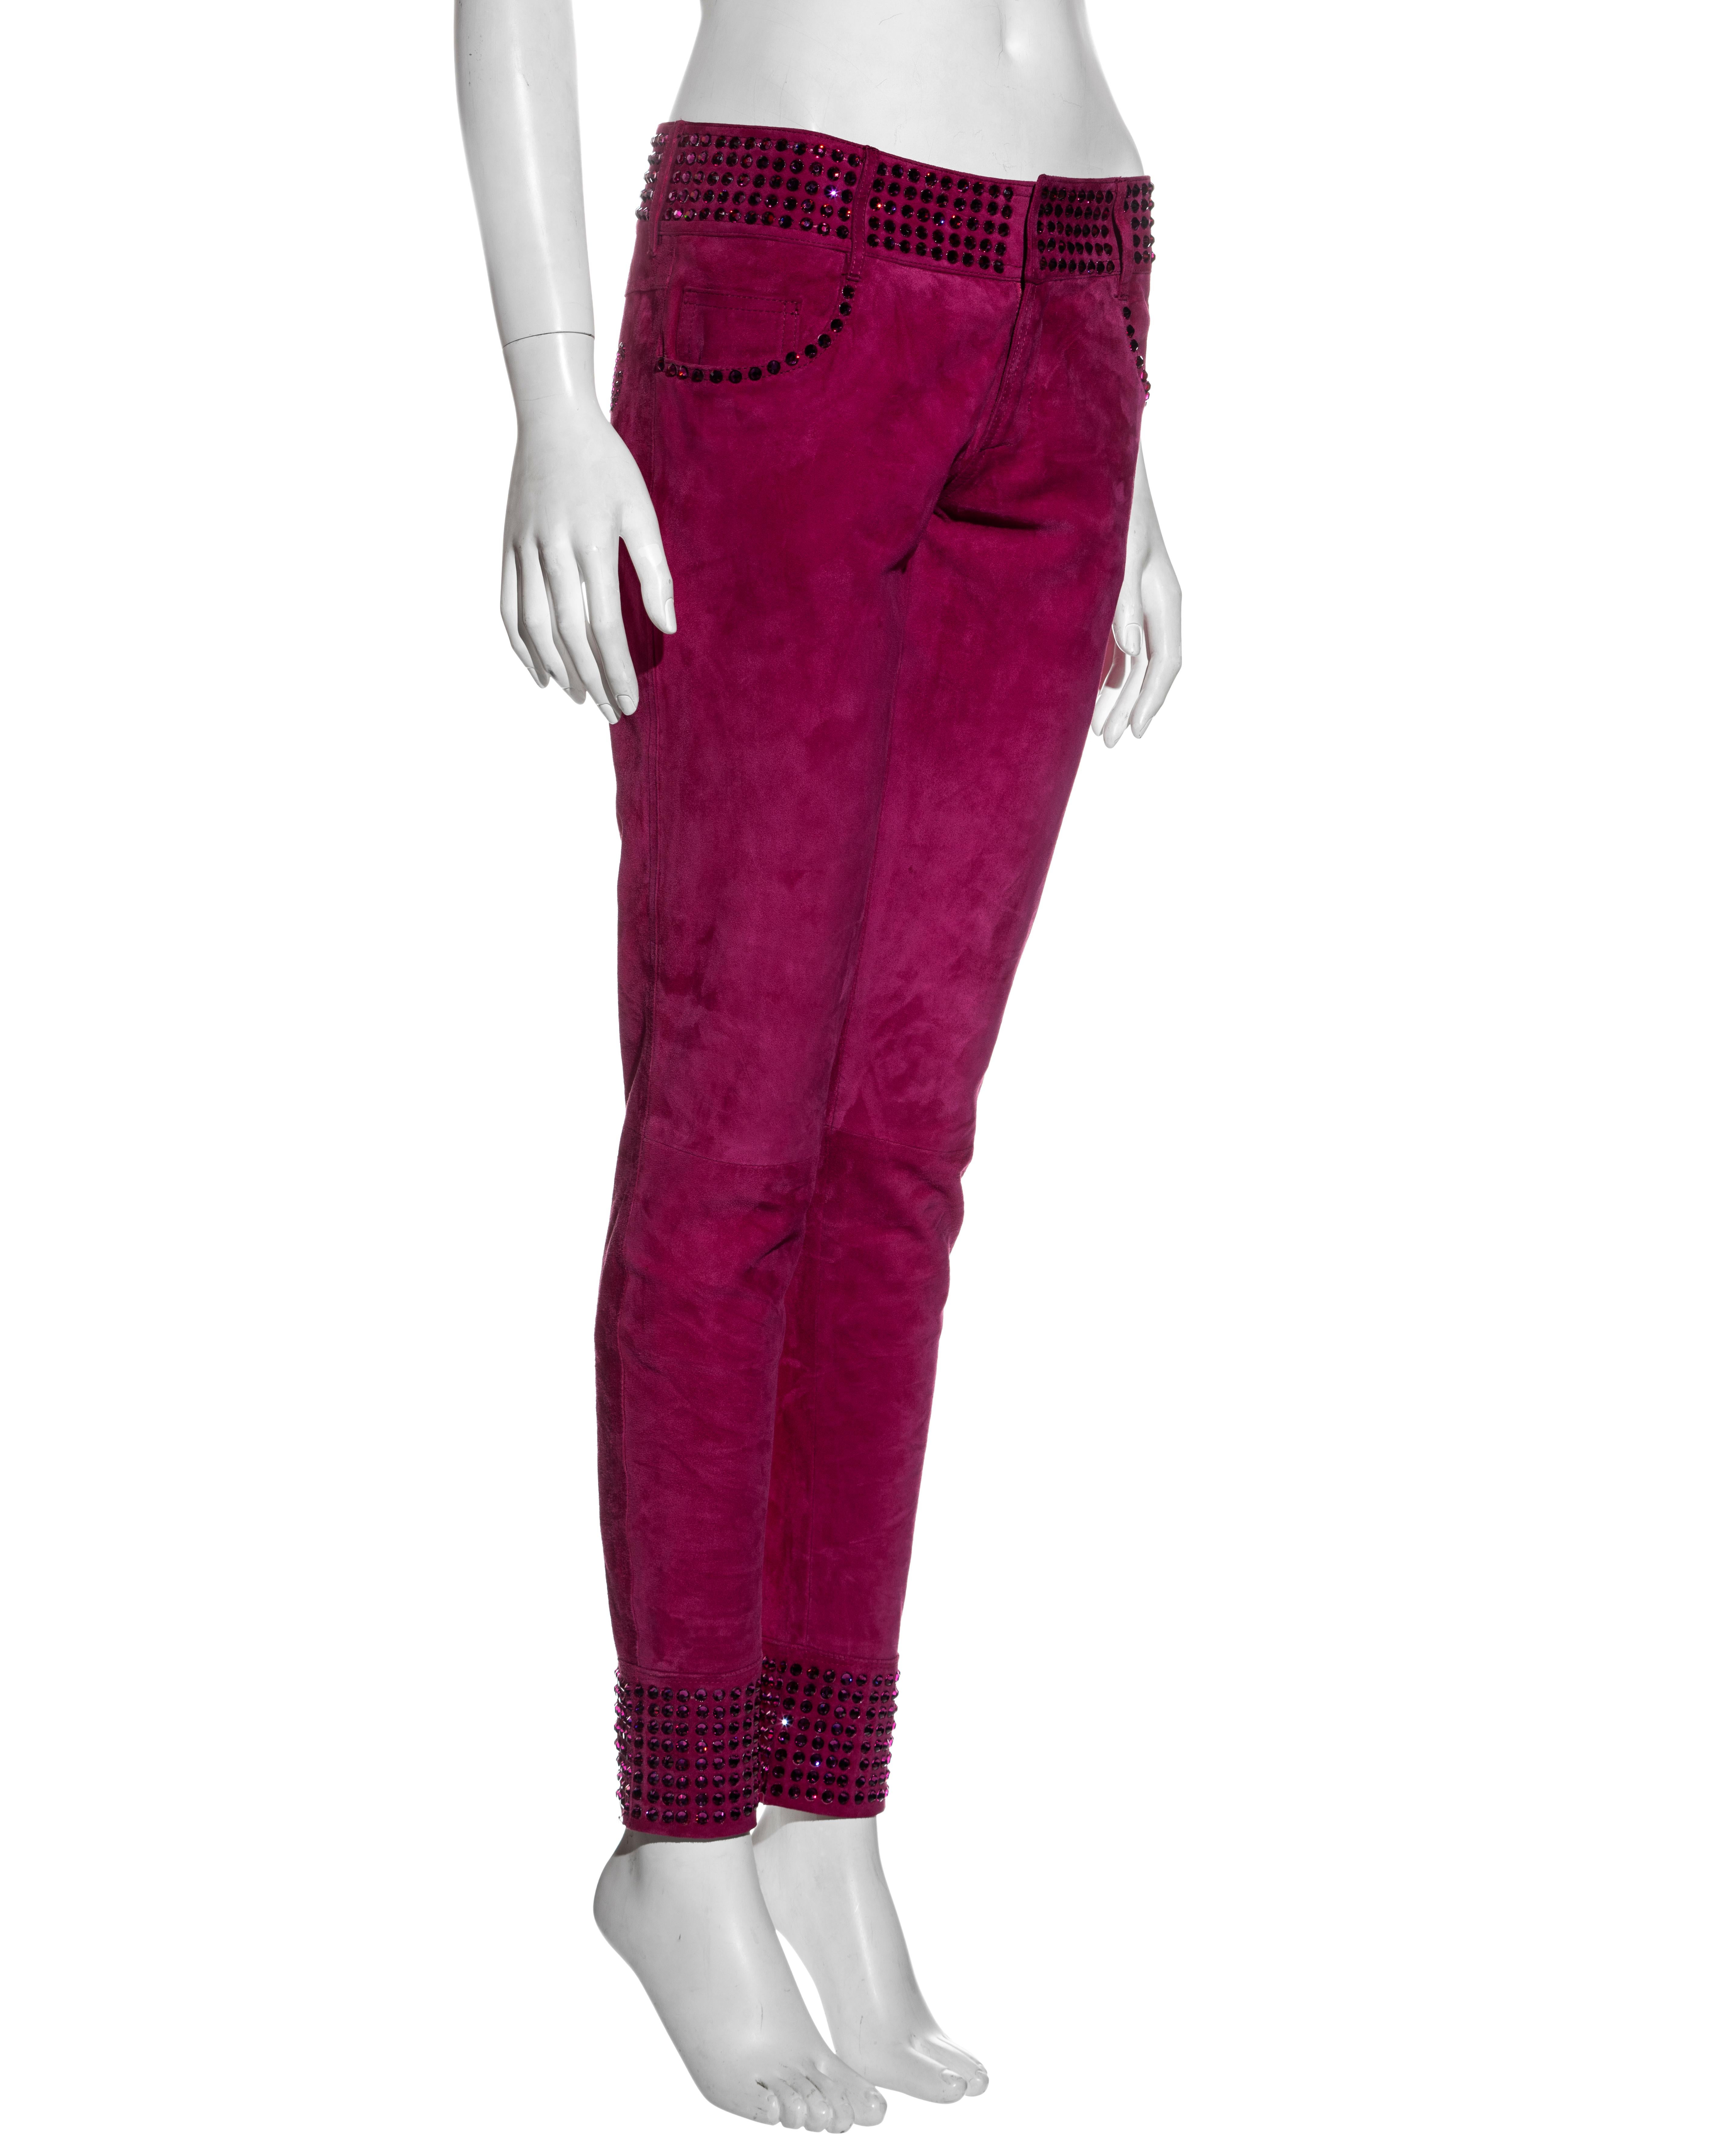 D&G by Dolce and Gabbana pink suede pants with crystals, c. 1998-1999 at  1stDibs